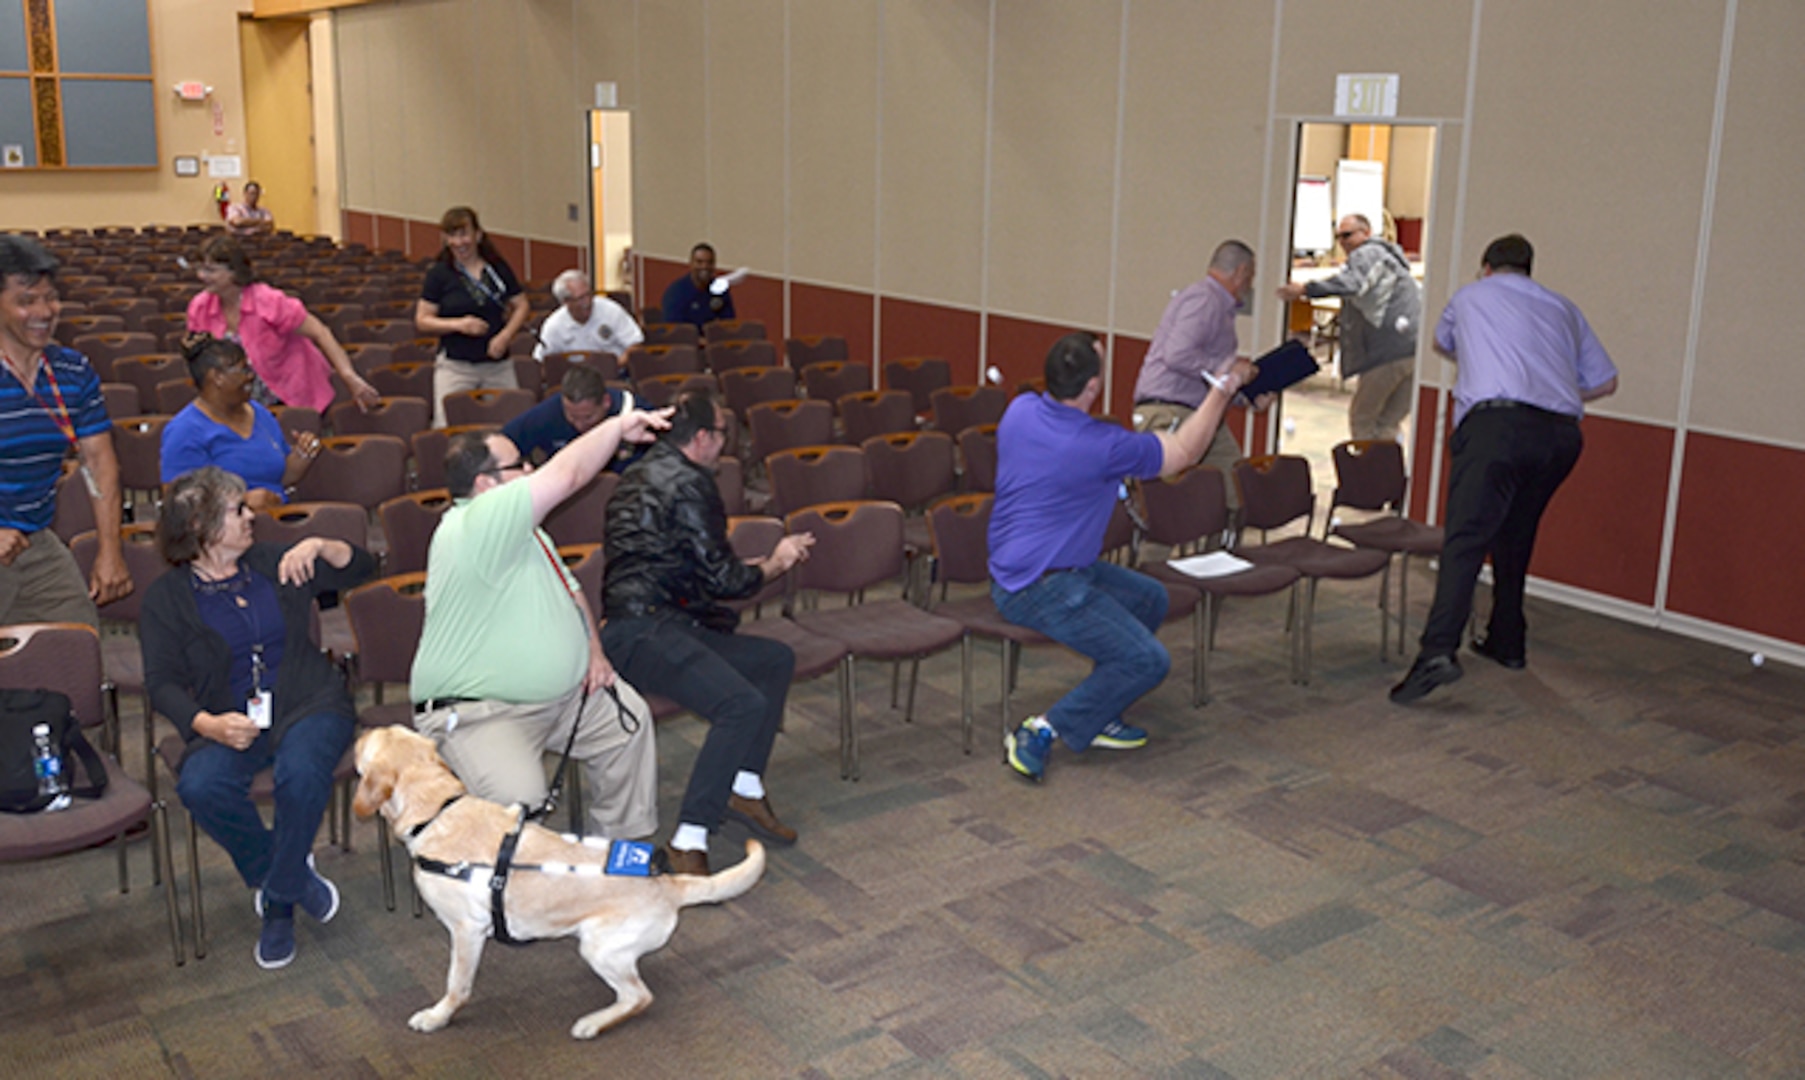 Defense Supply Center Richmond employees throw paper at a mock active shooter, then run away to demonstrate how to disrupt and disorient his thought processes during Active Shooter Awareness and Response Training on DSCR in Virginia, June 23, 2017 in the Frank B. Lotts Conference Center. (Photo by Jackie Roberts)